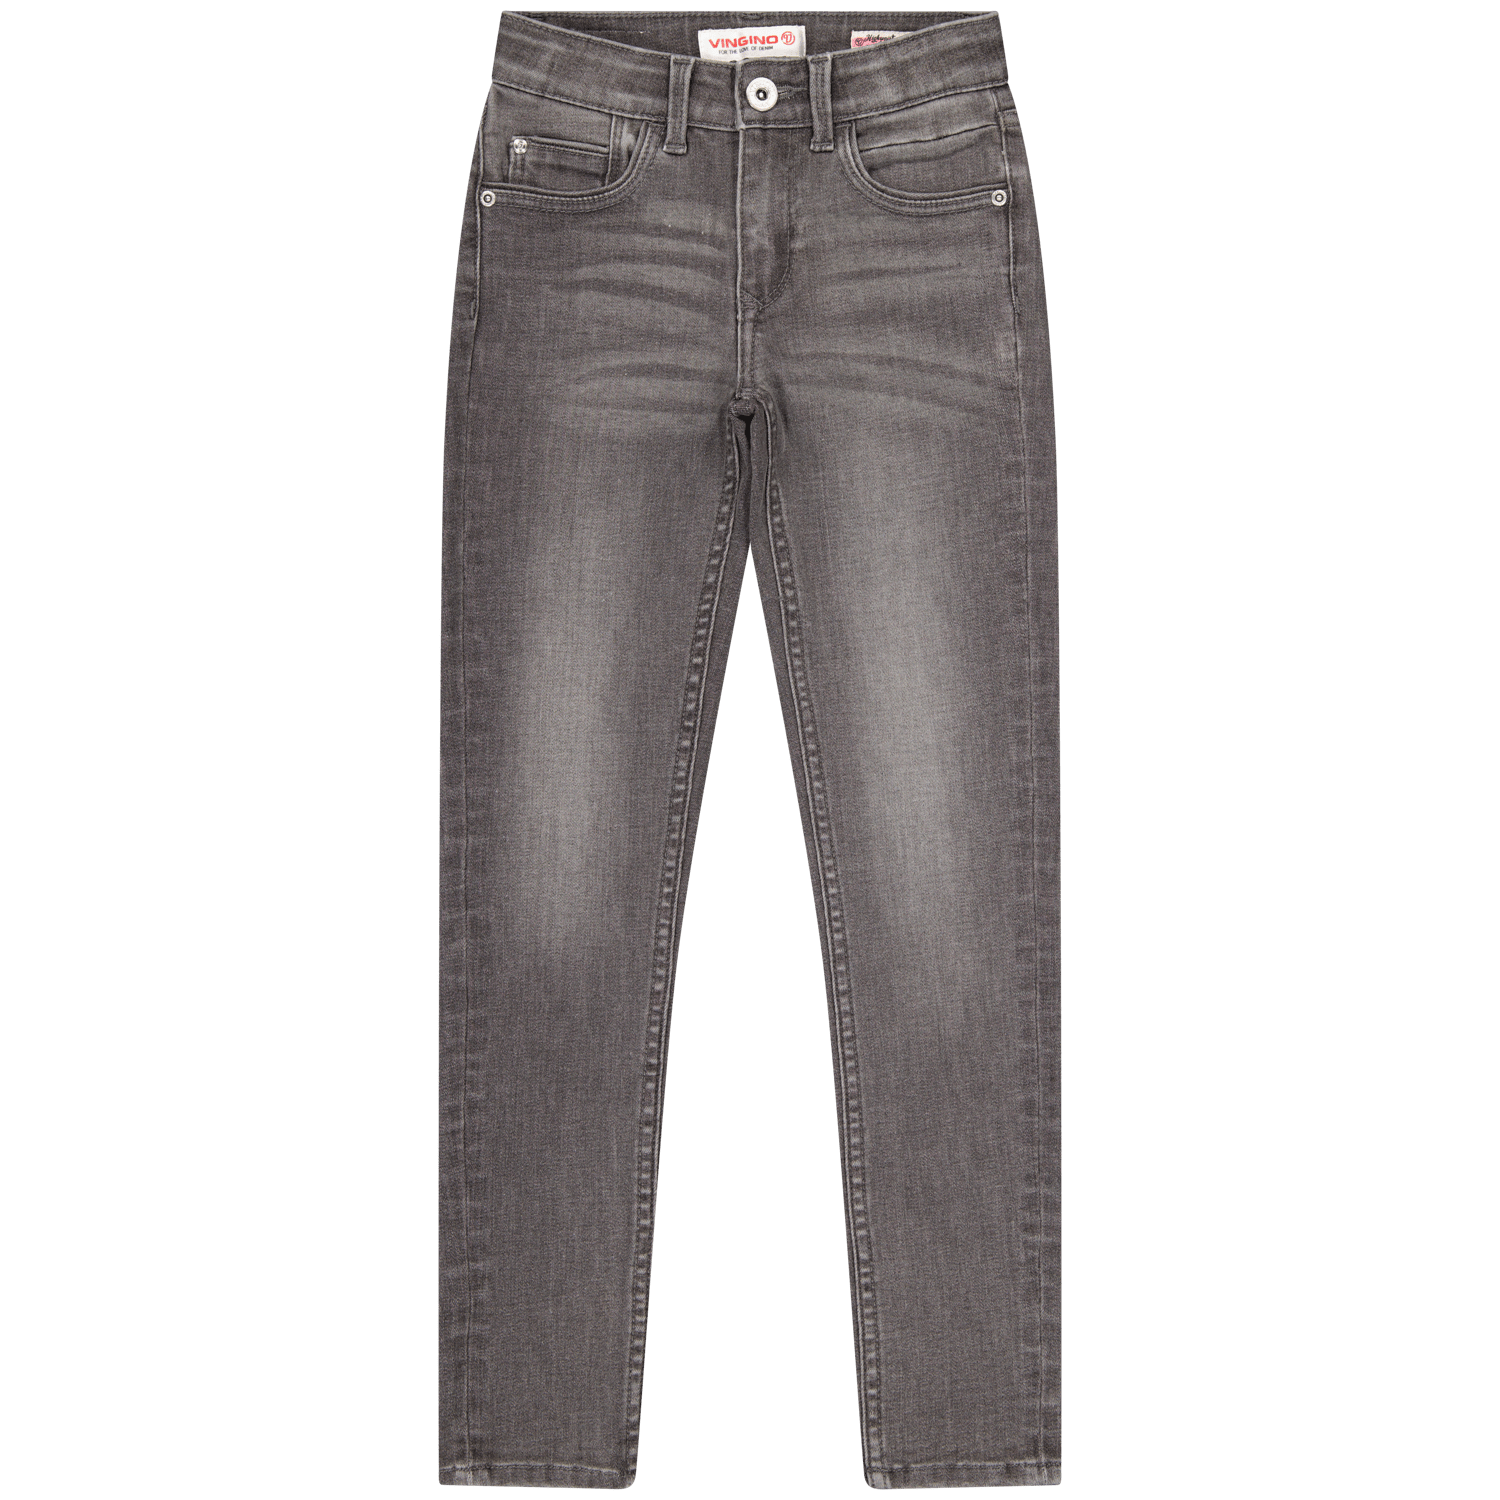 Super Skinny Jeans Bellina product